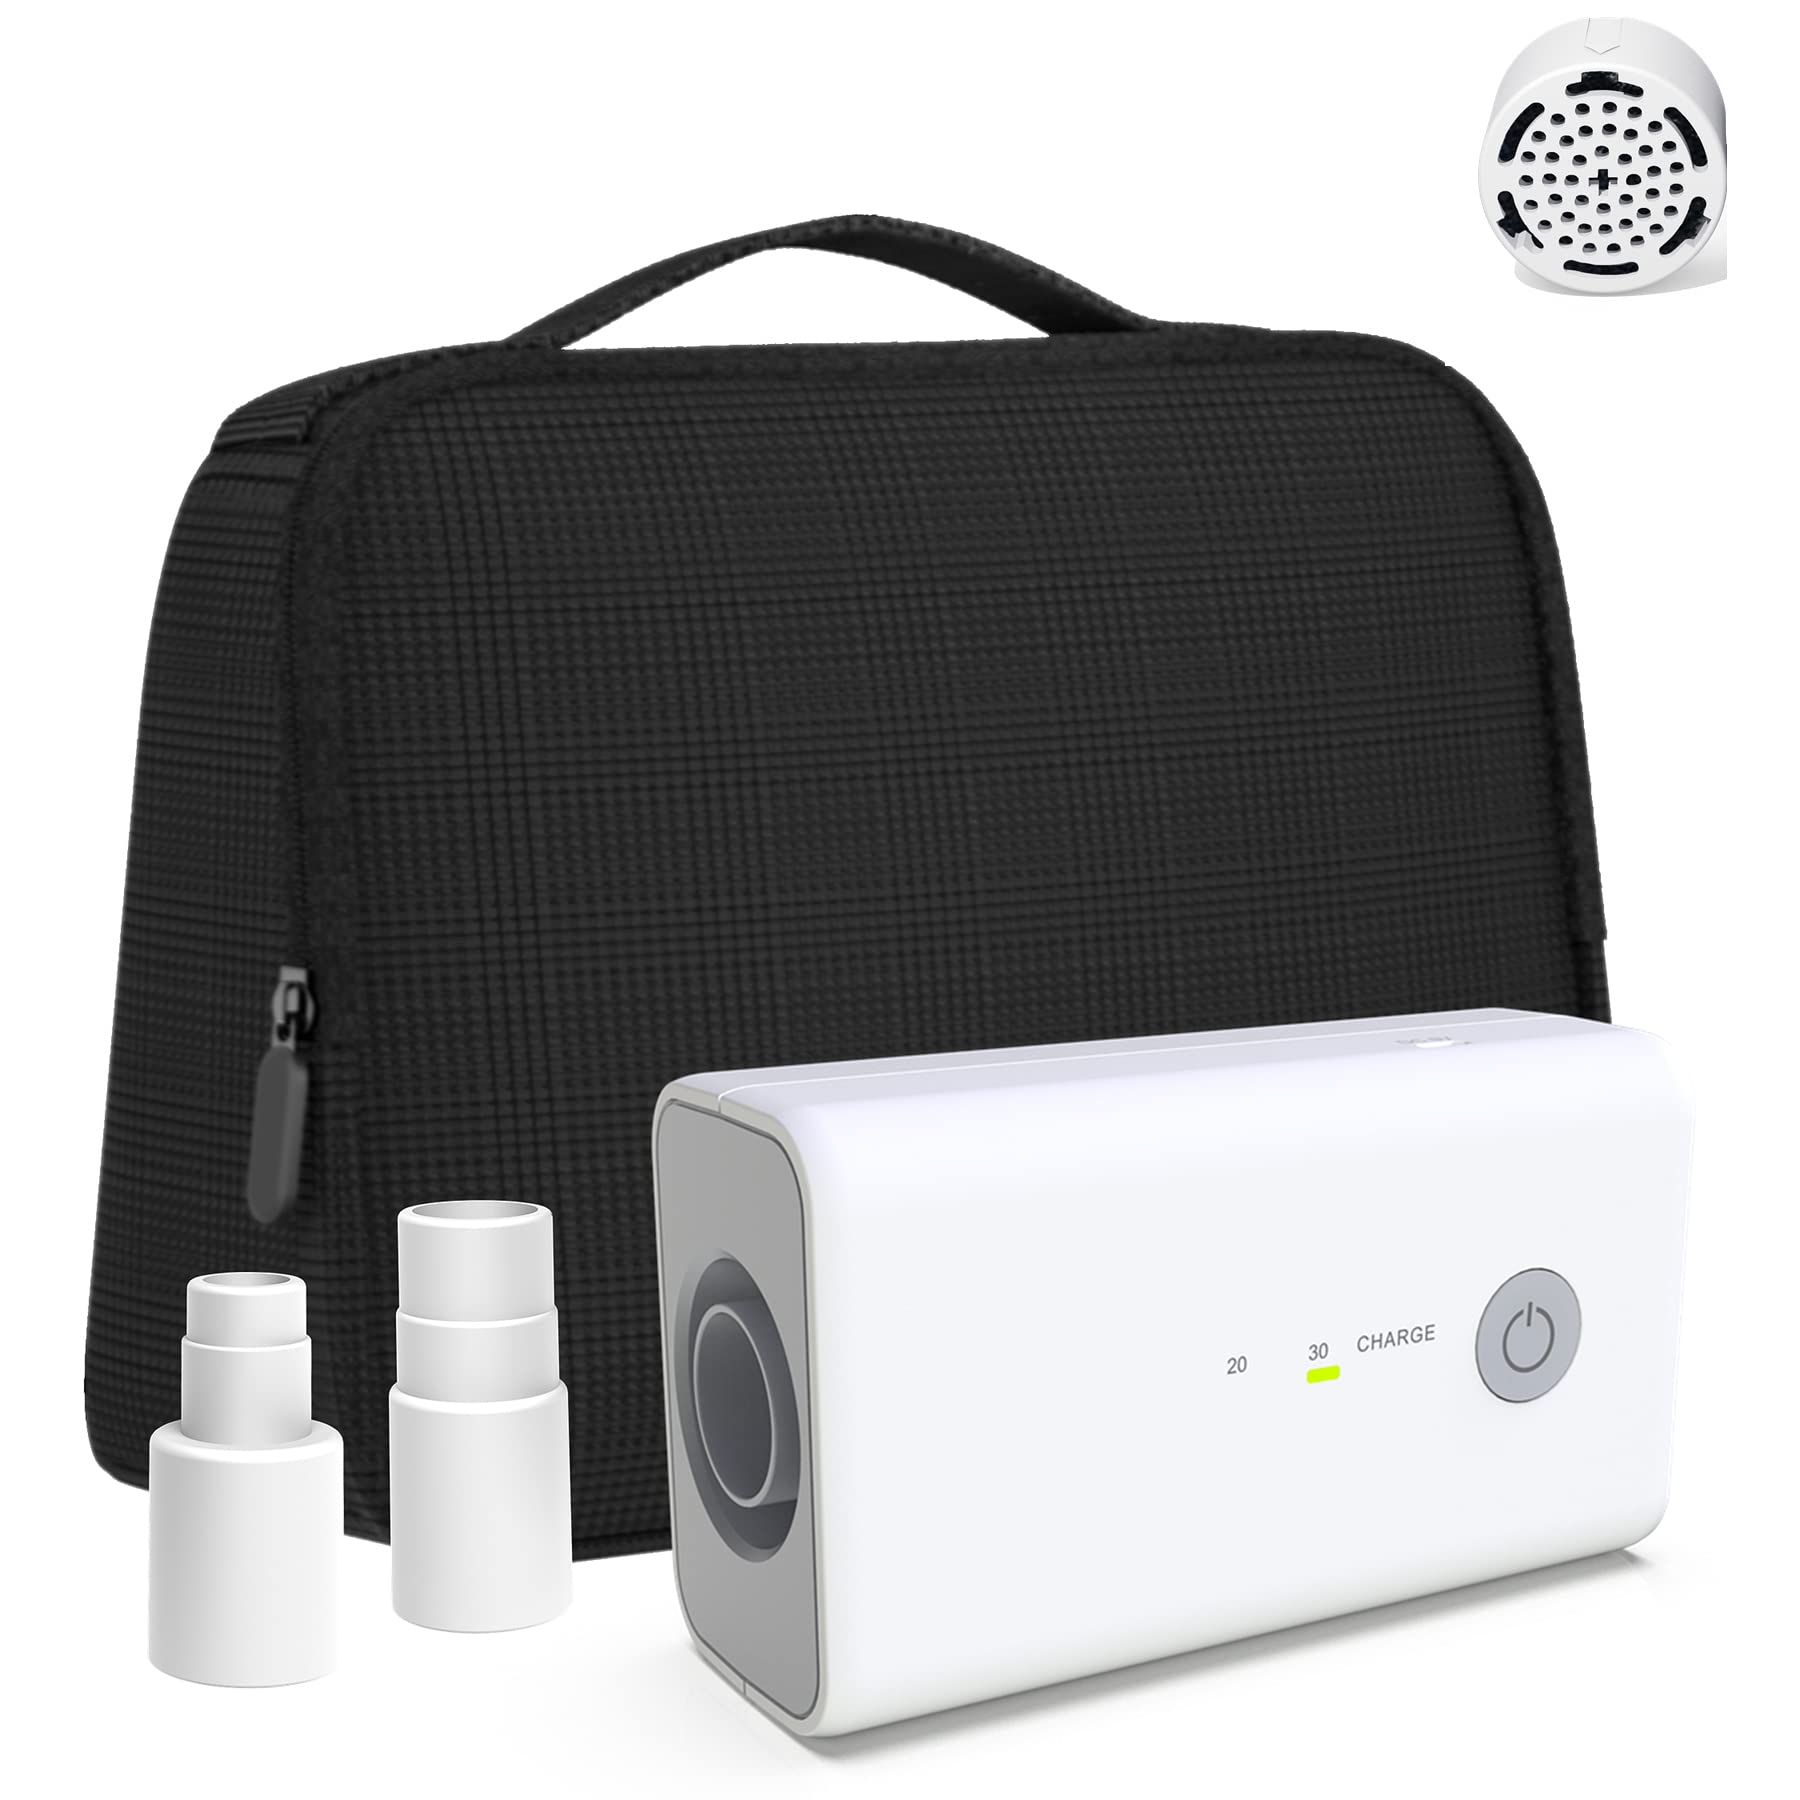 solidcleaner-CPAP-cleaner-machine